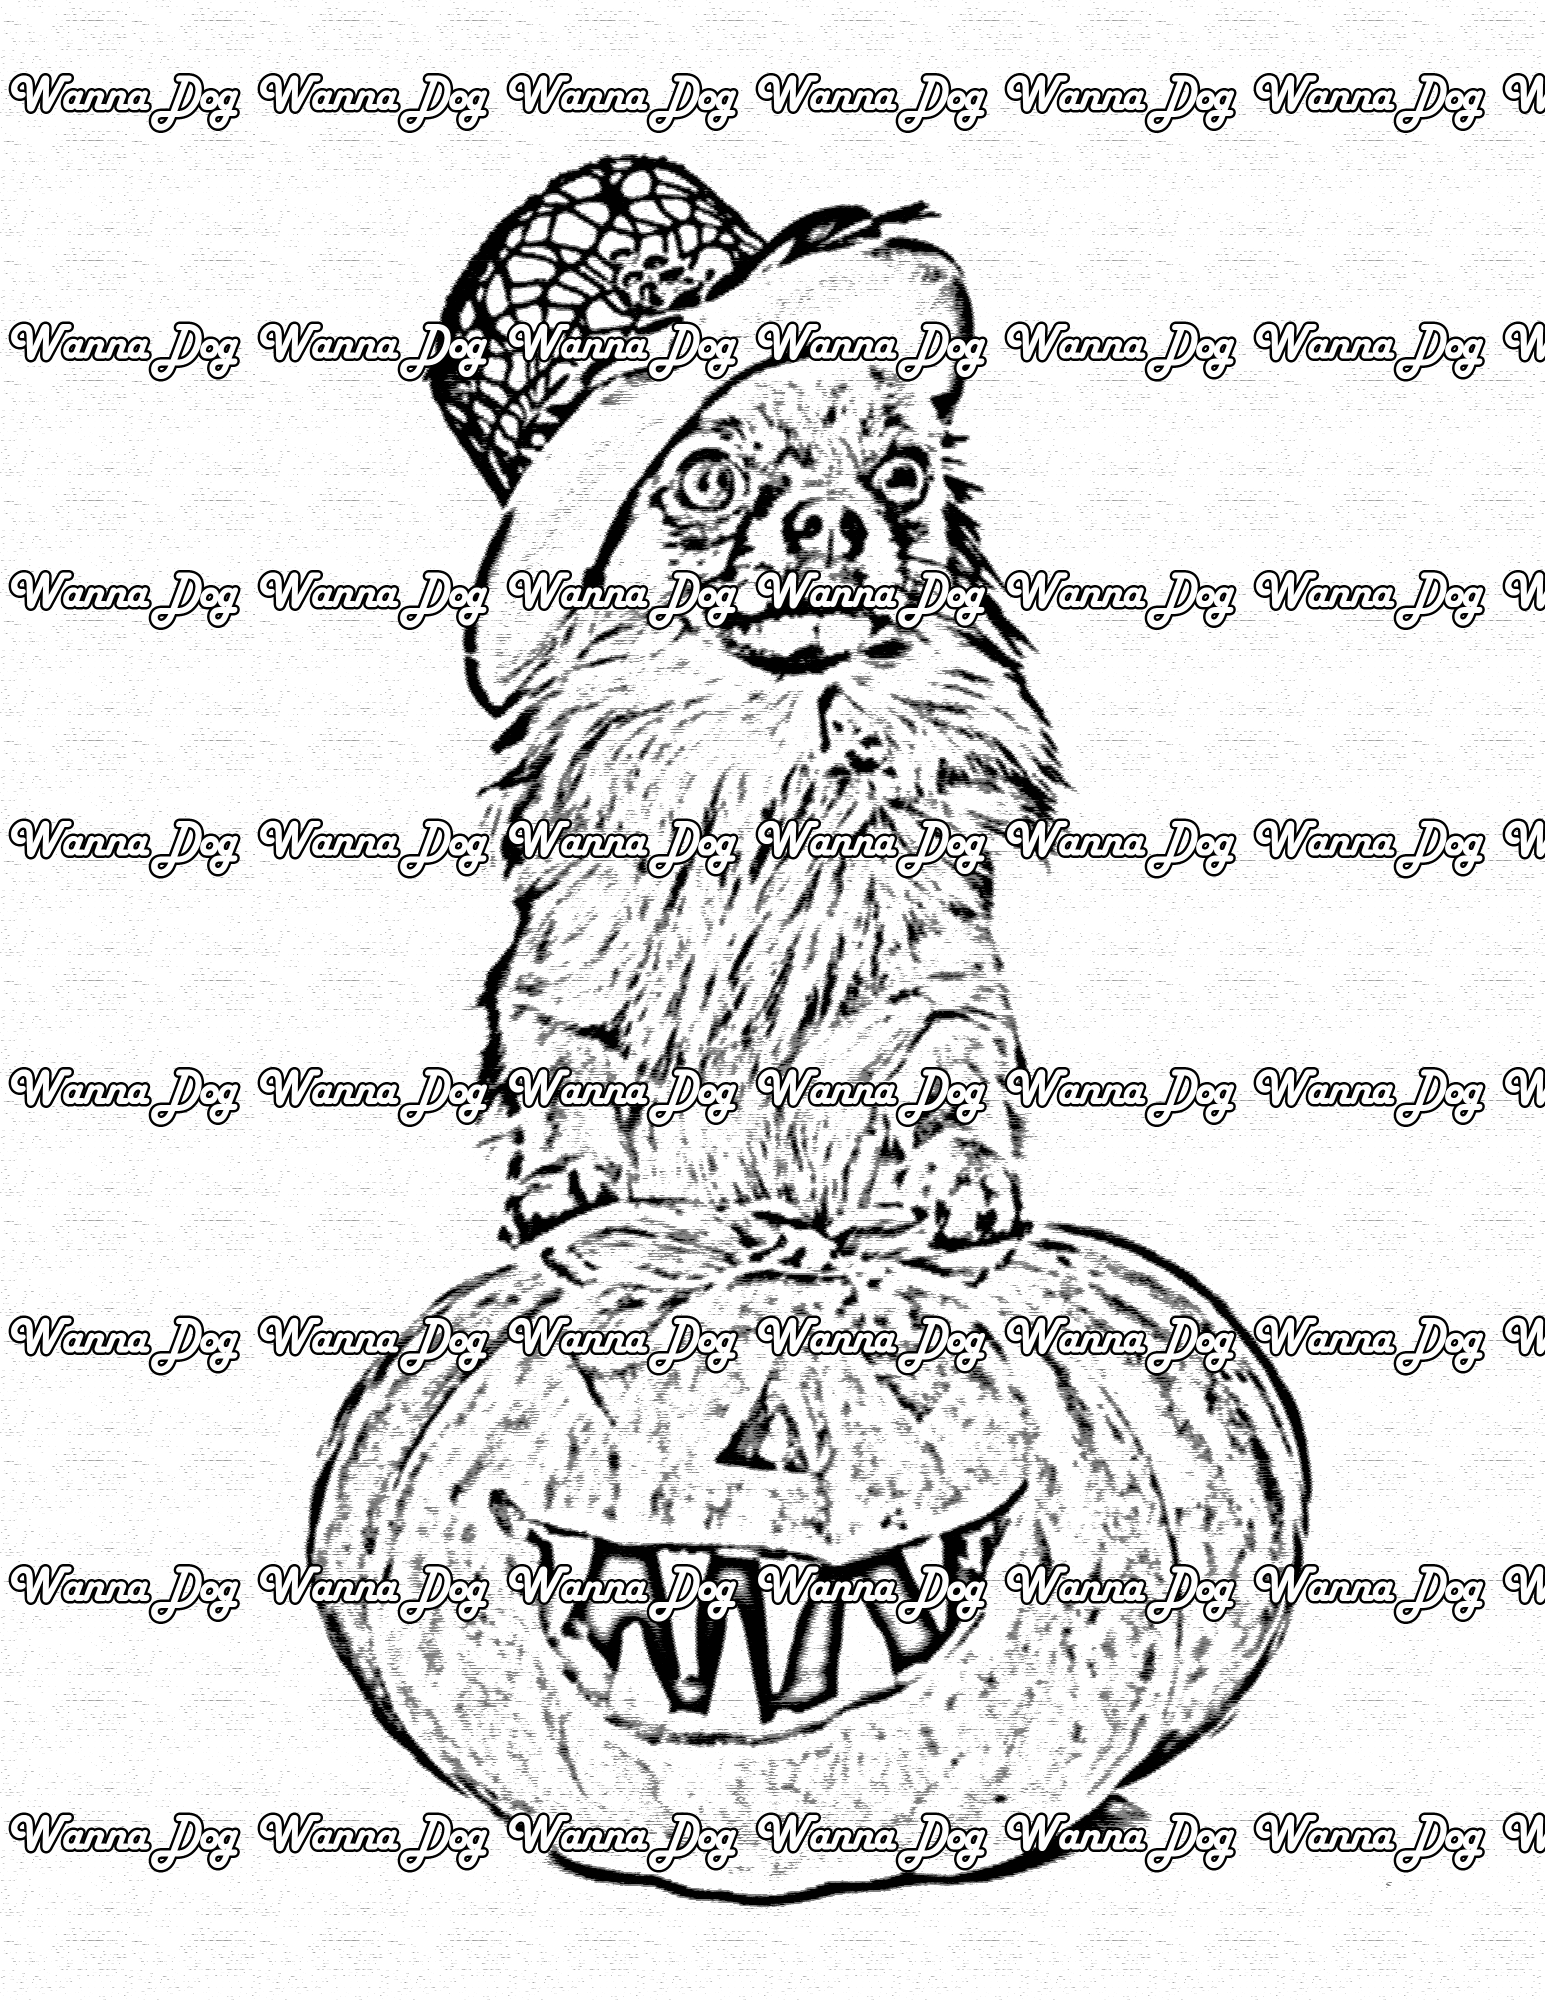 Halloween Dog Coloring Page of a Dog with a pumpkin